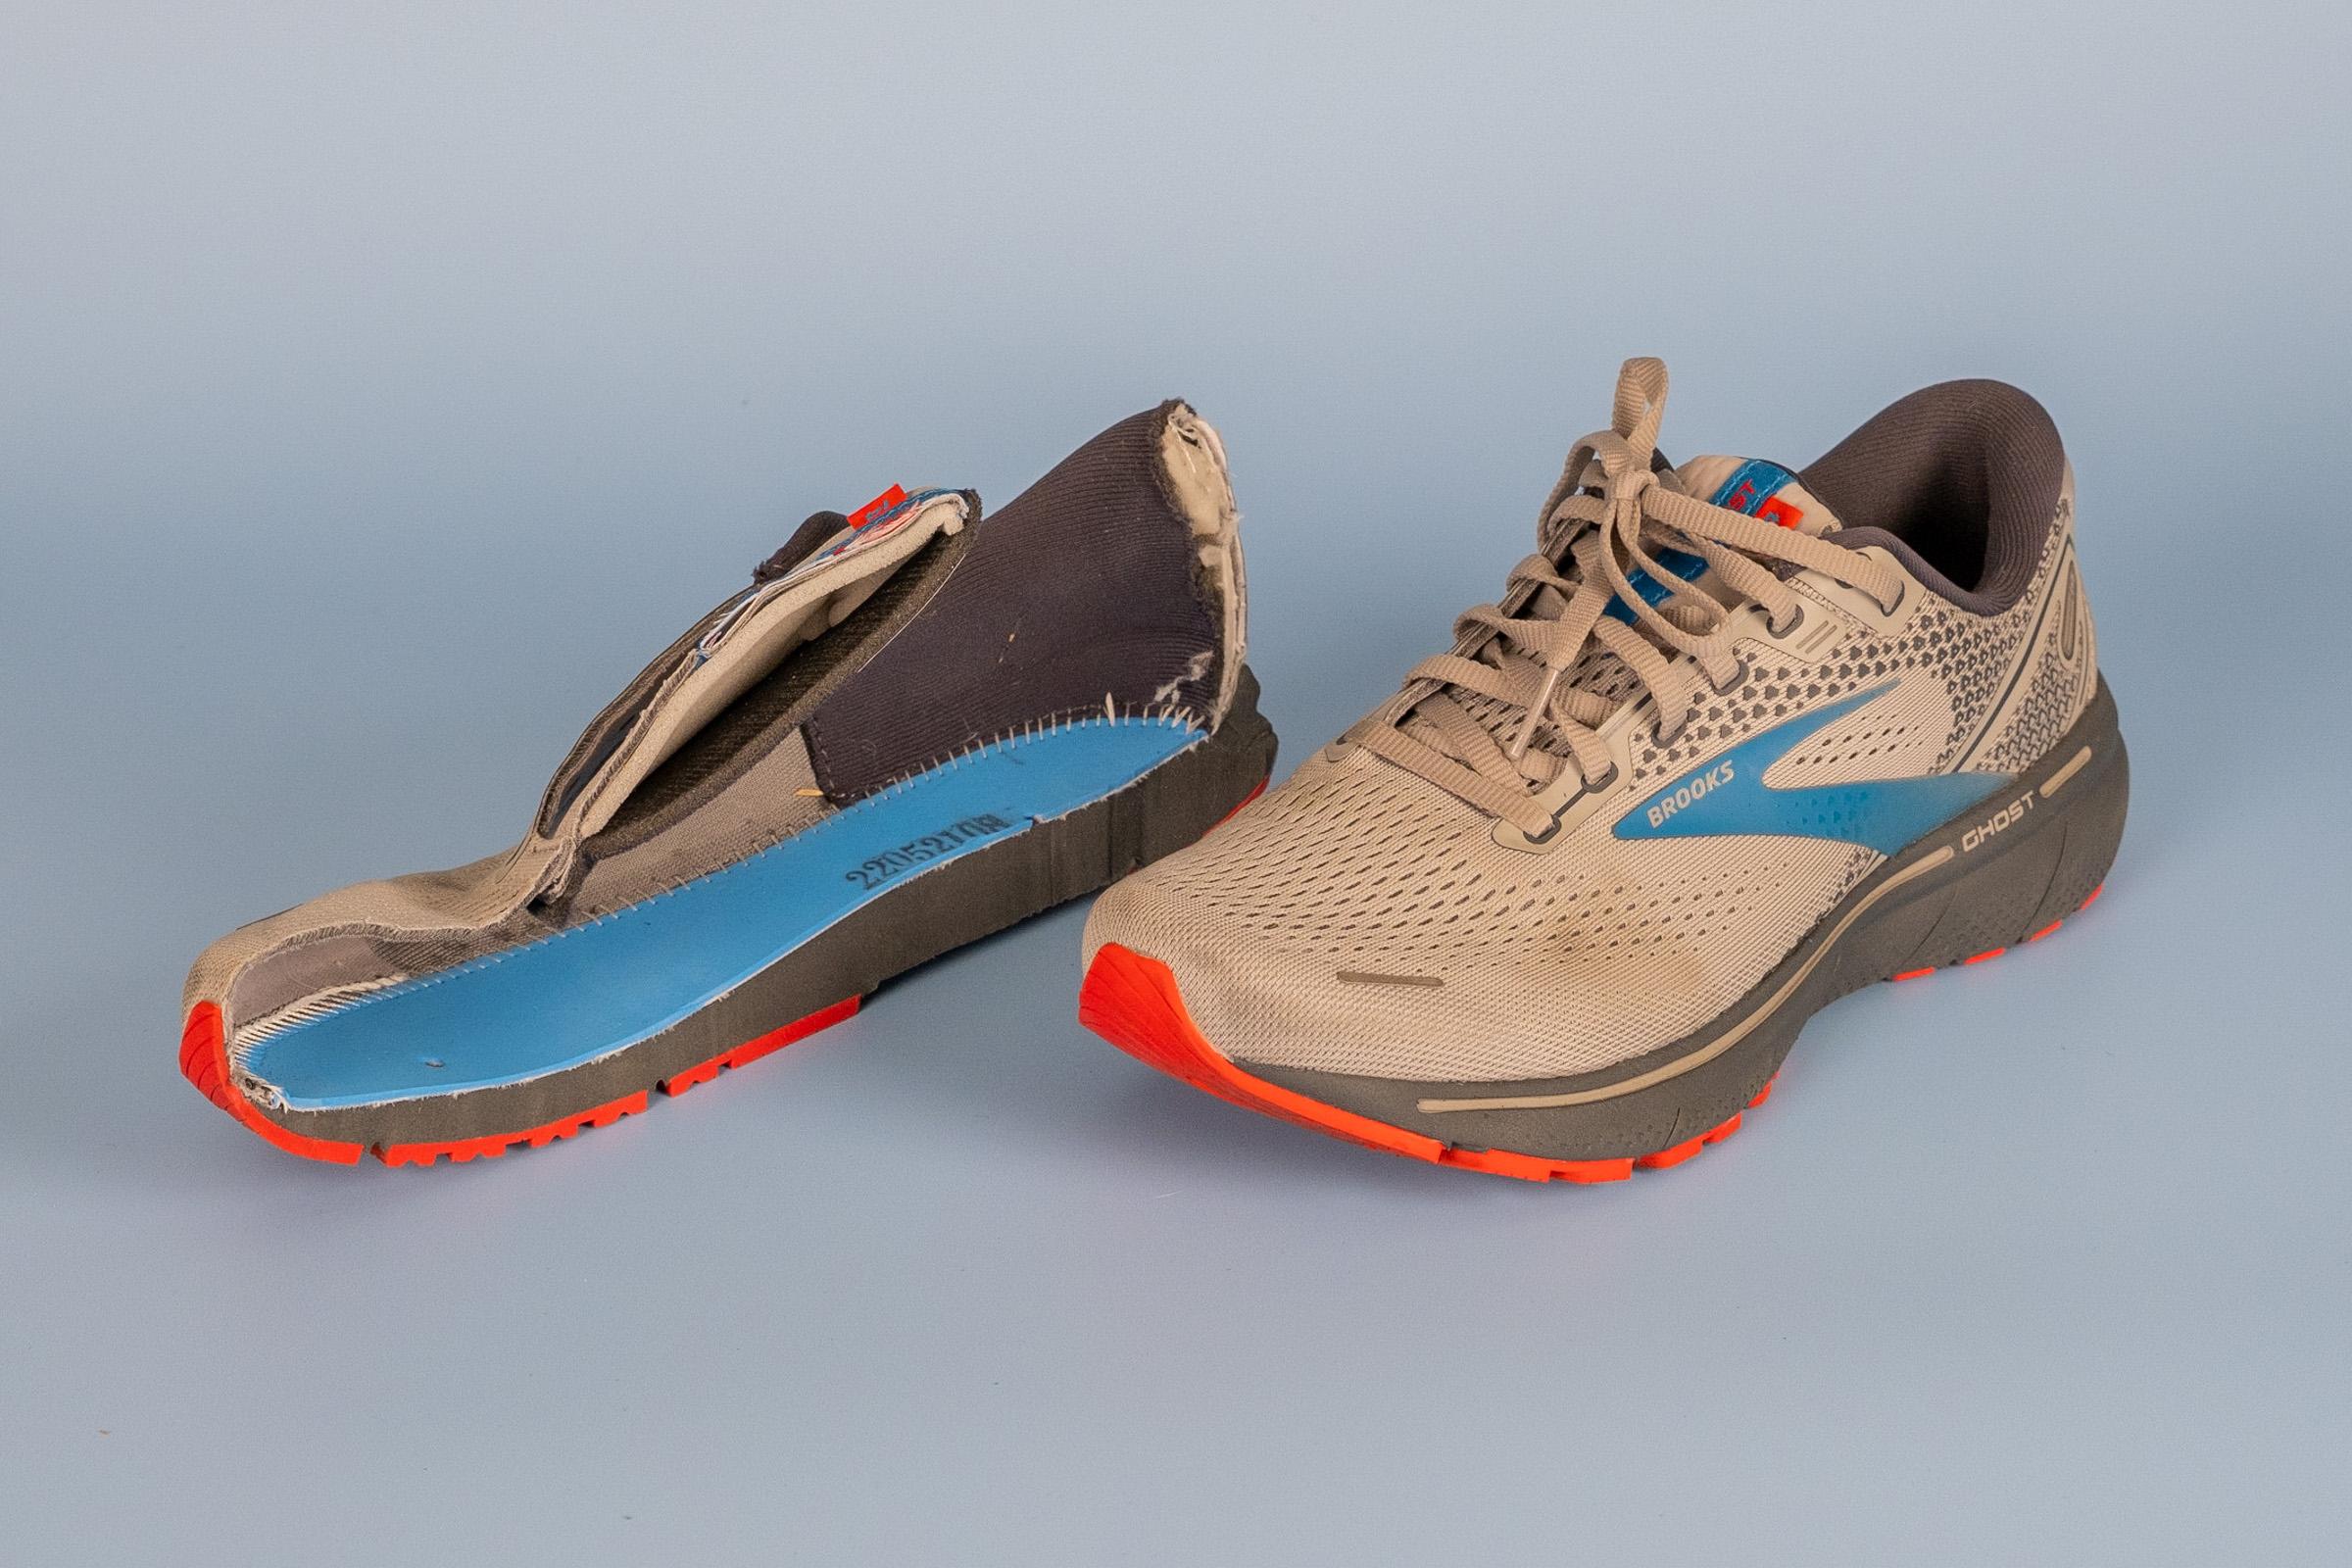 Cut in half: Brooks Ghost 14 Review